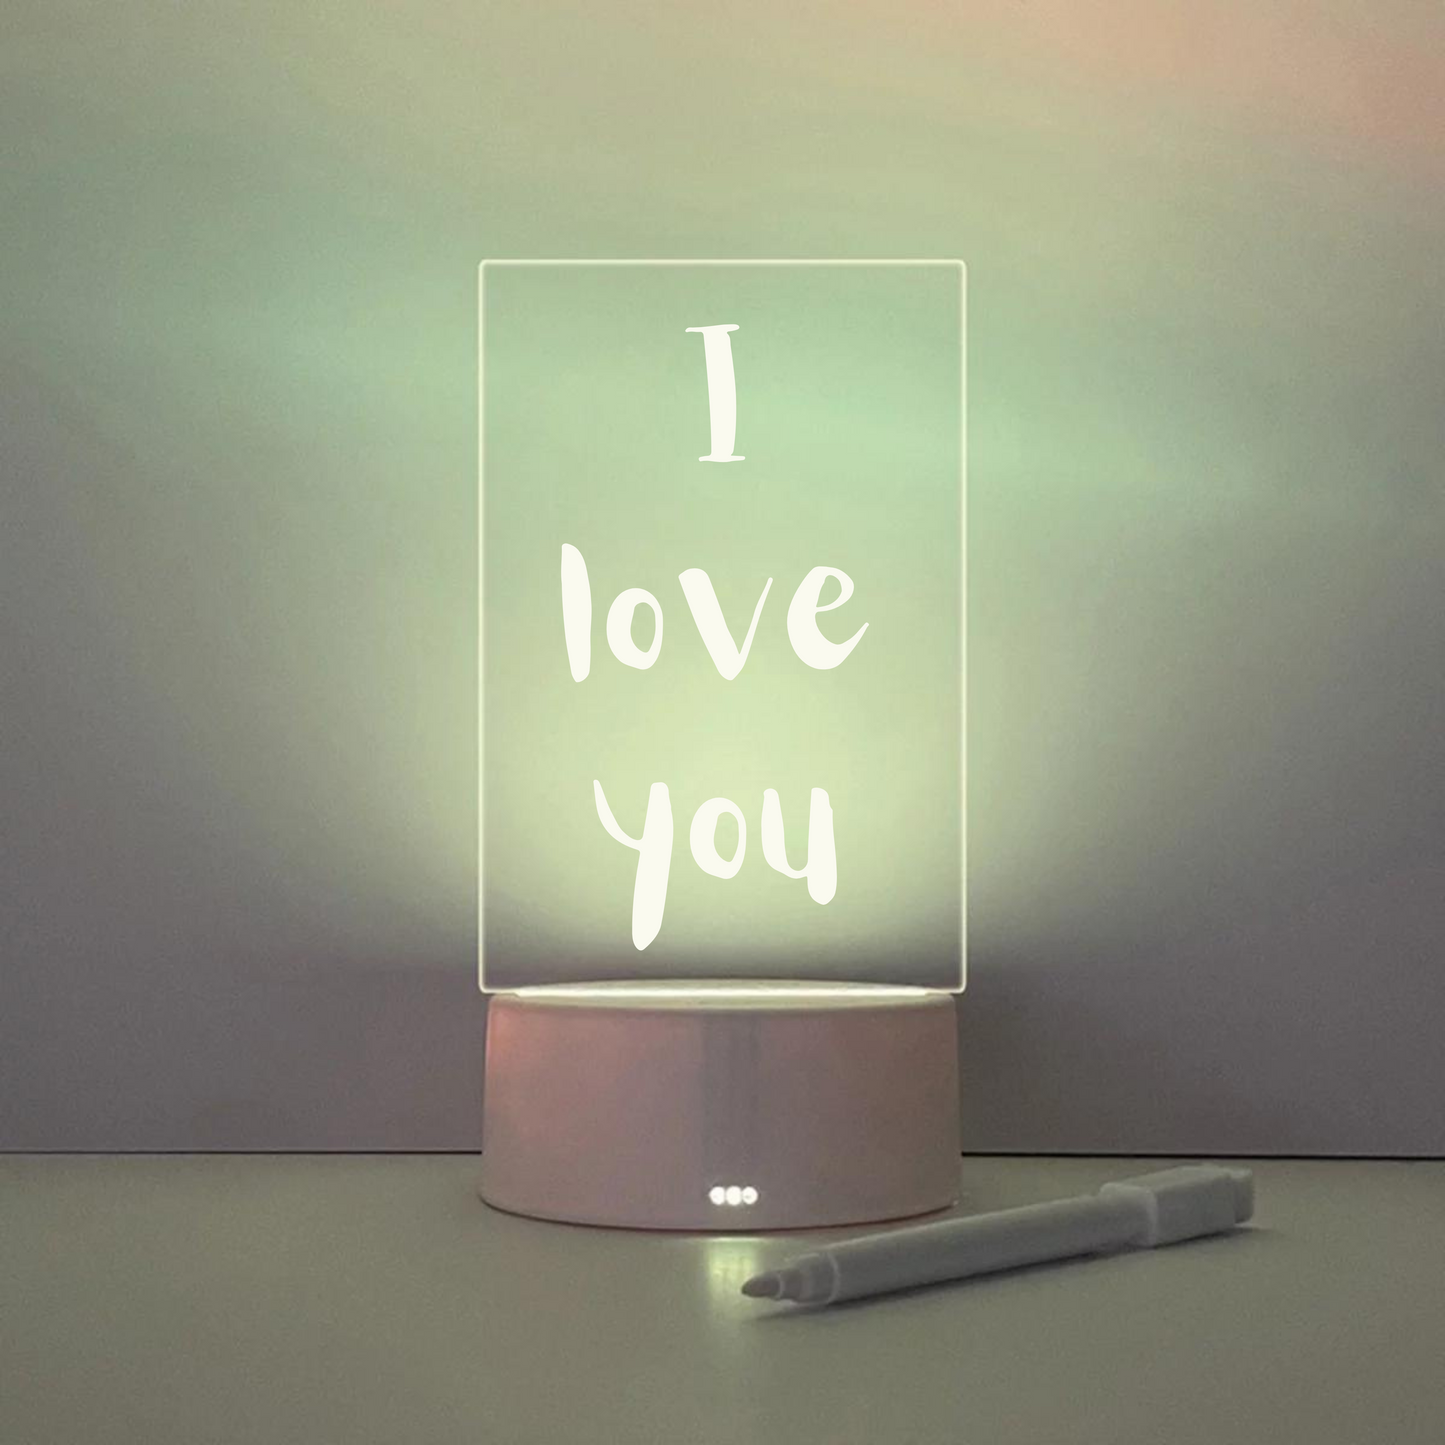 Reydiance™- Acrylic Notepad led lamp Erasable & Rewriteable Message Board - Night Lamp With Dry Erase Magic Marker